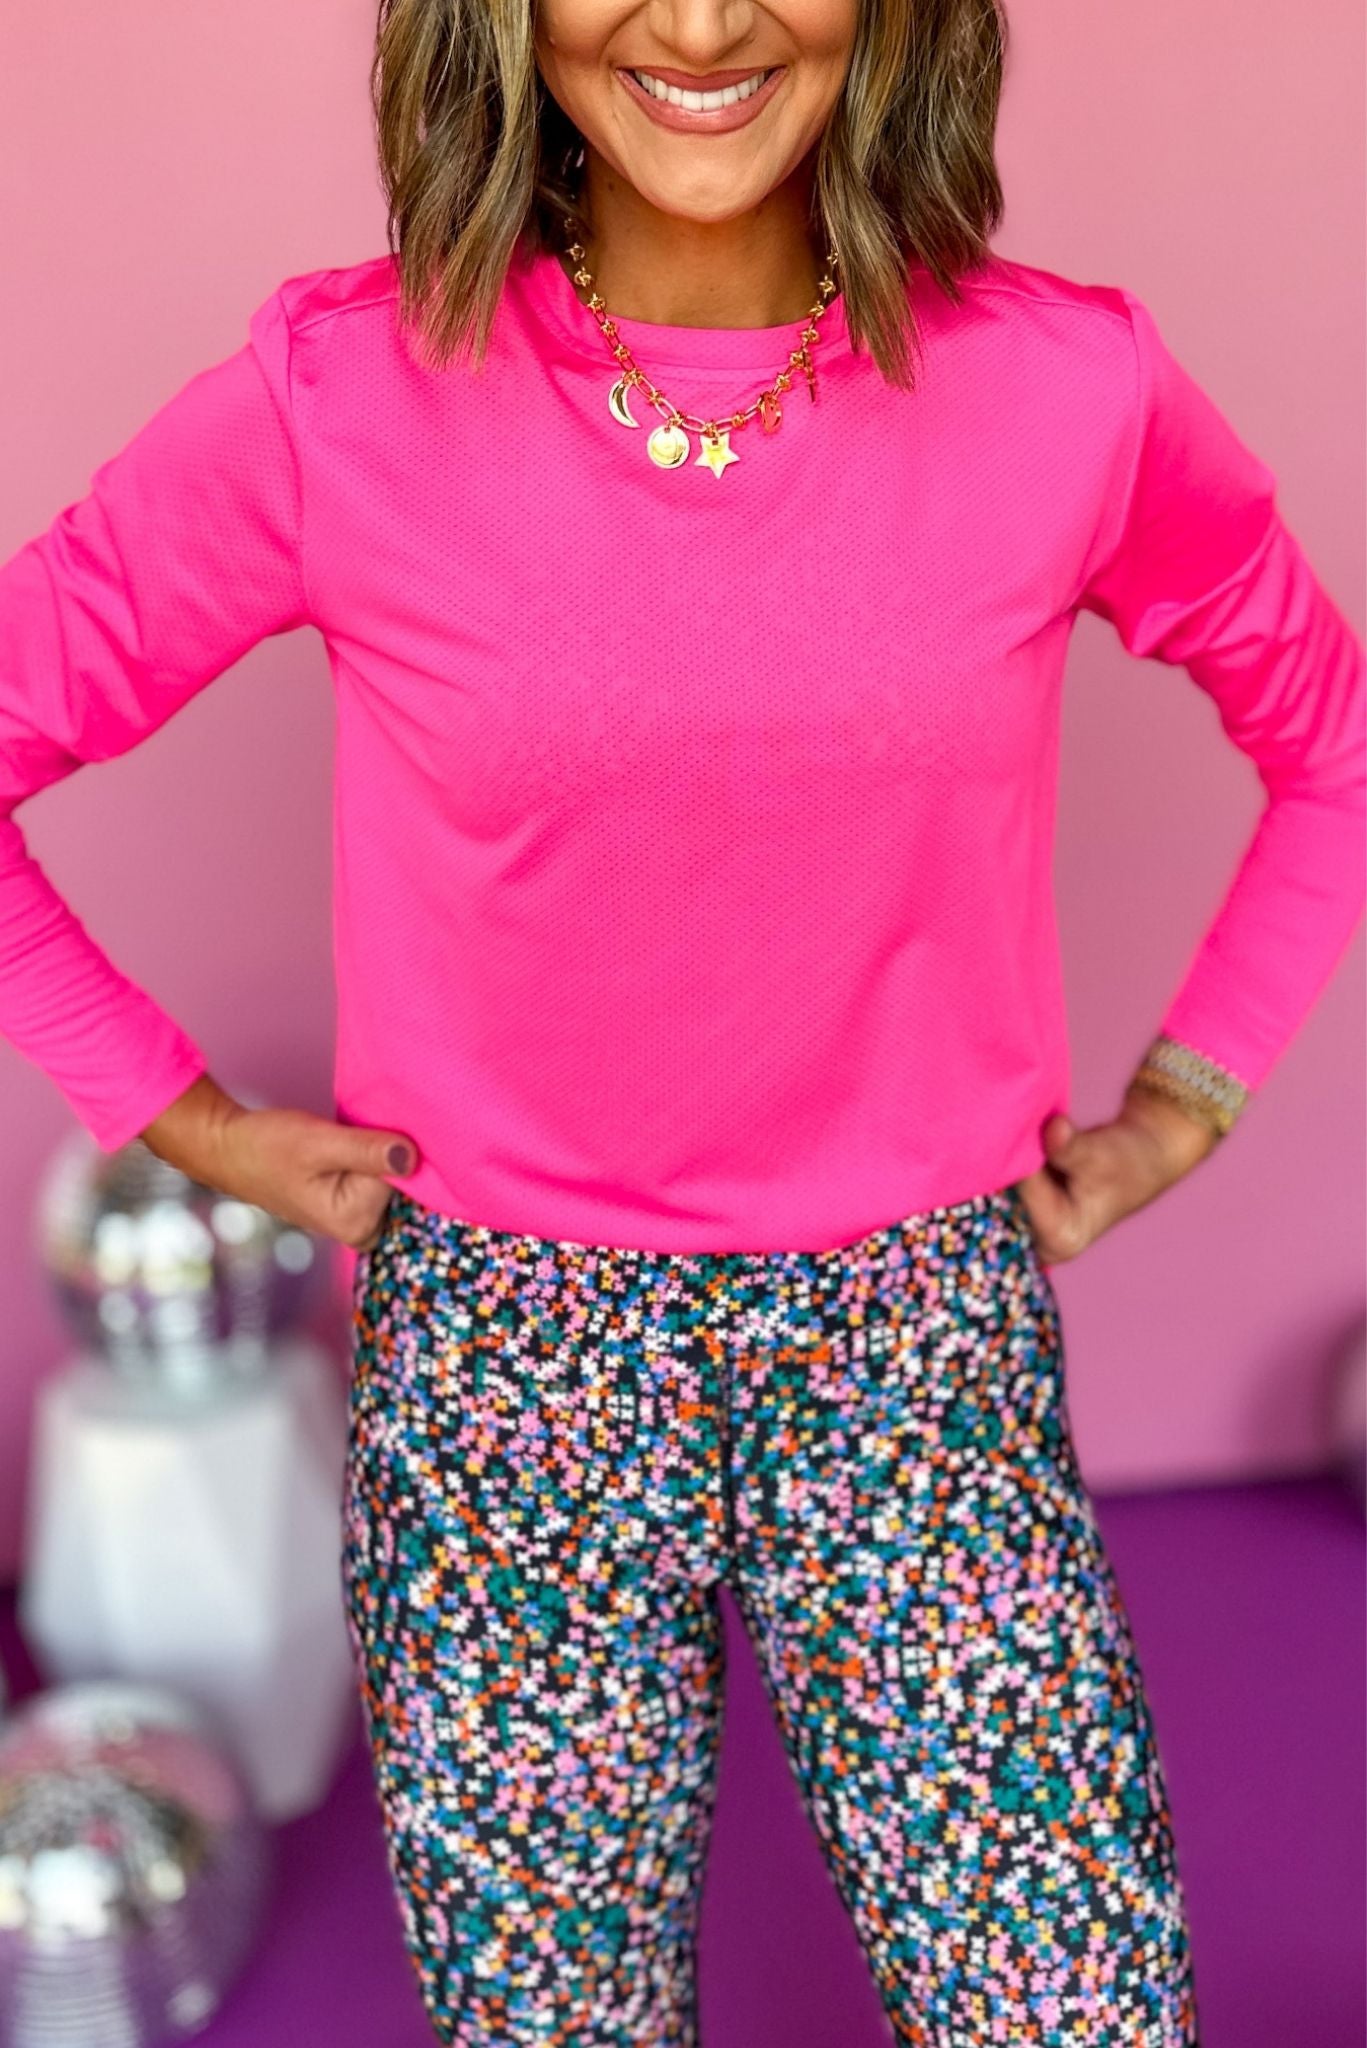 SSYS Hot Pink Long Sleeve Active Top, elevated top, must have top, must have style, must have athleisure, elevated athleisure, mom style, athletic style, shop style your senses by mallory fitzsimmons